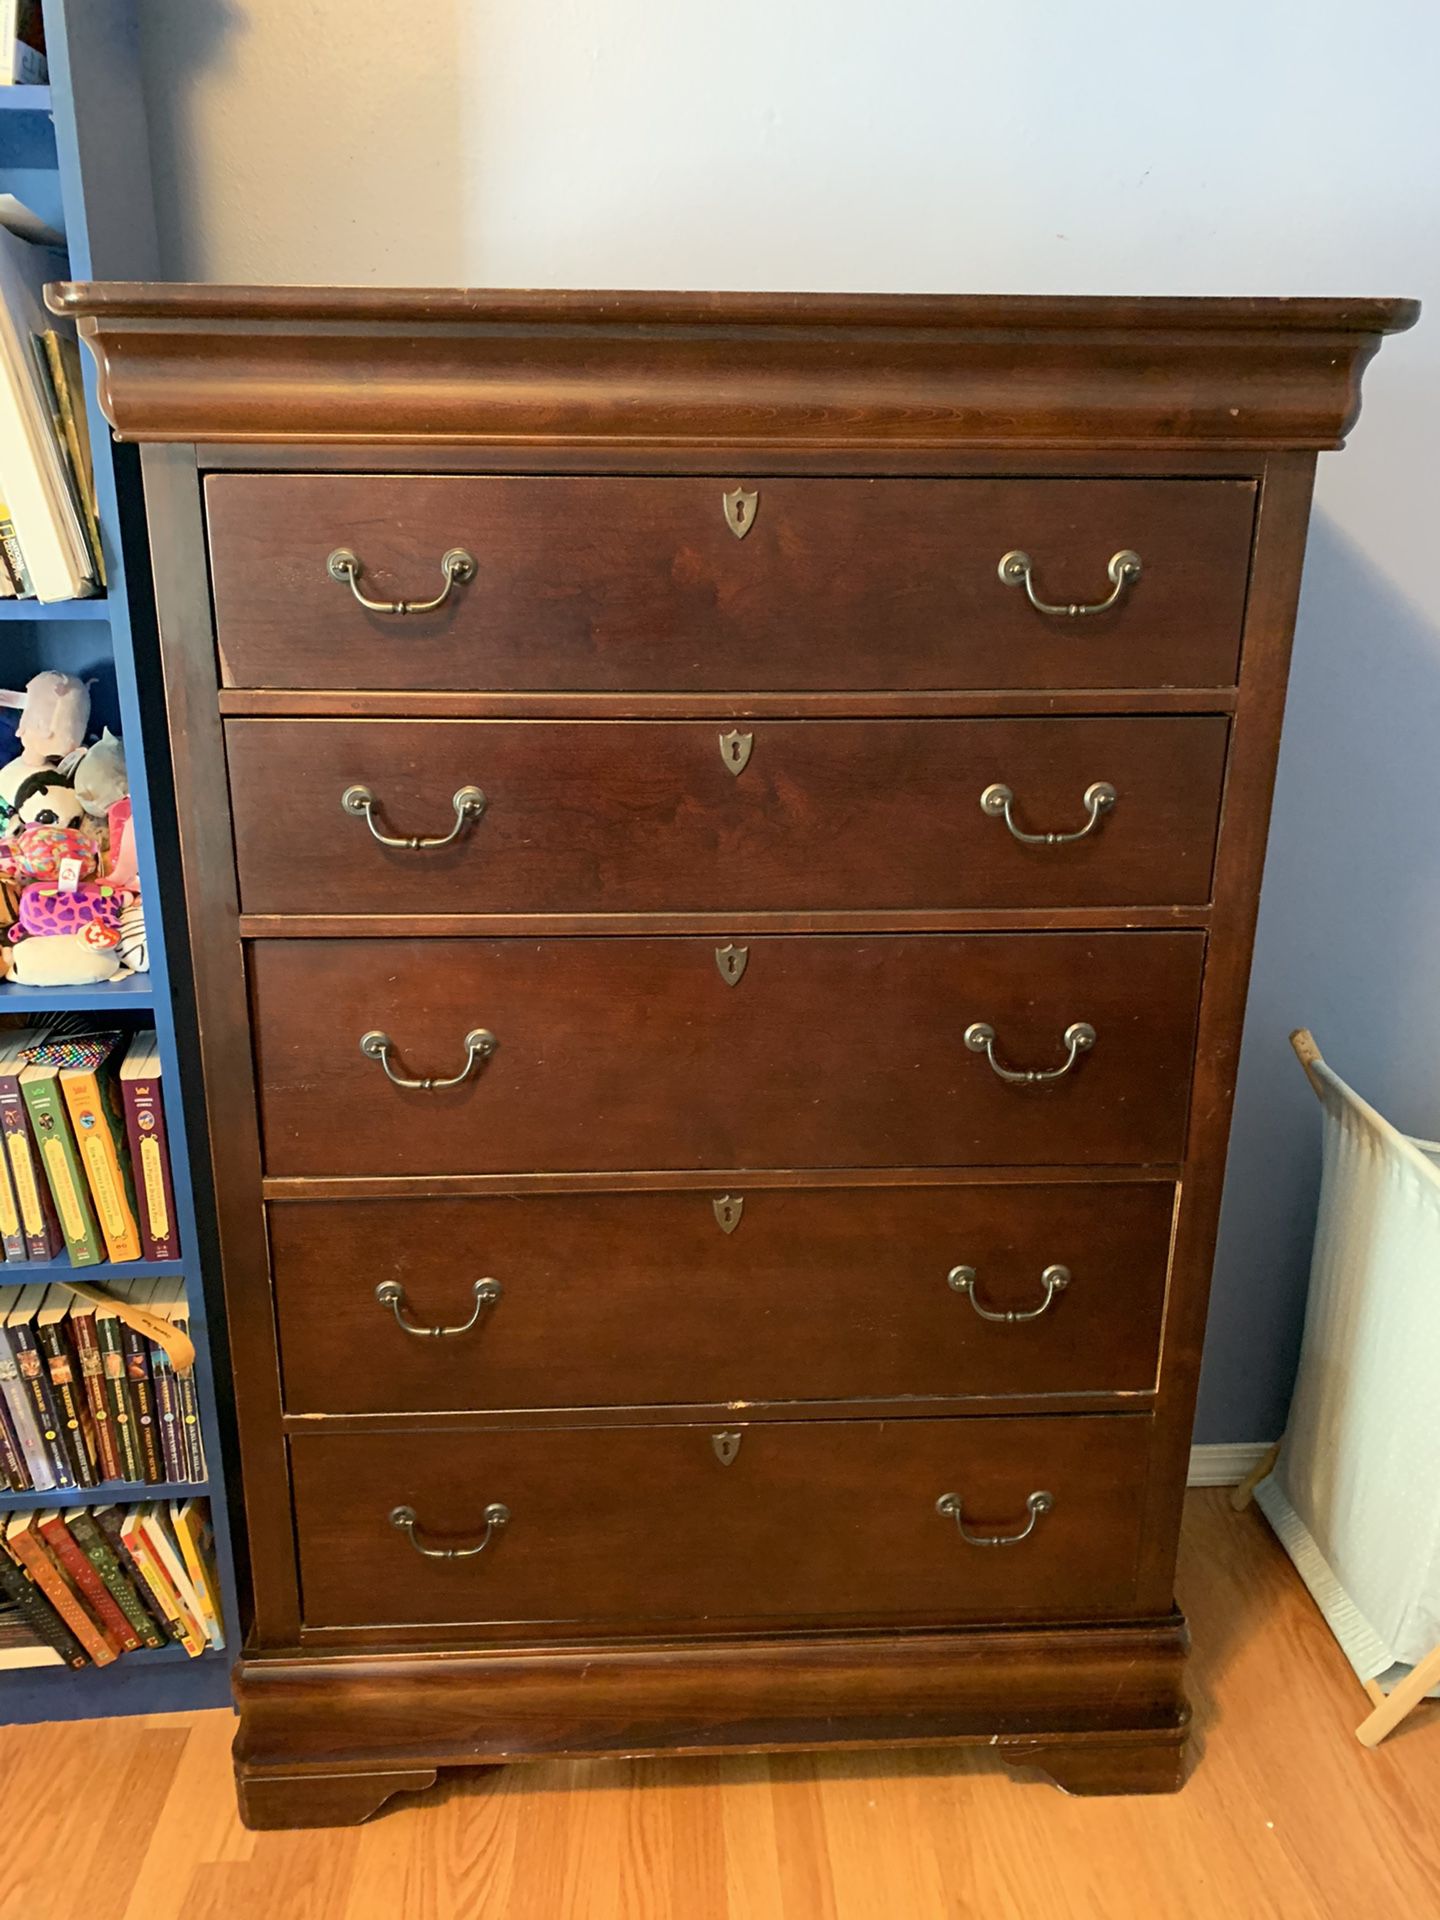 PENDING (please don’t contact) Free dresser, solid wood